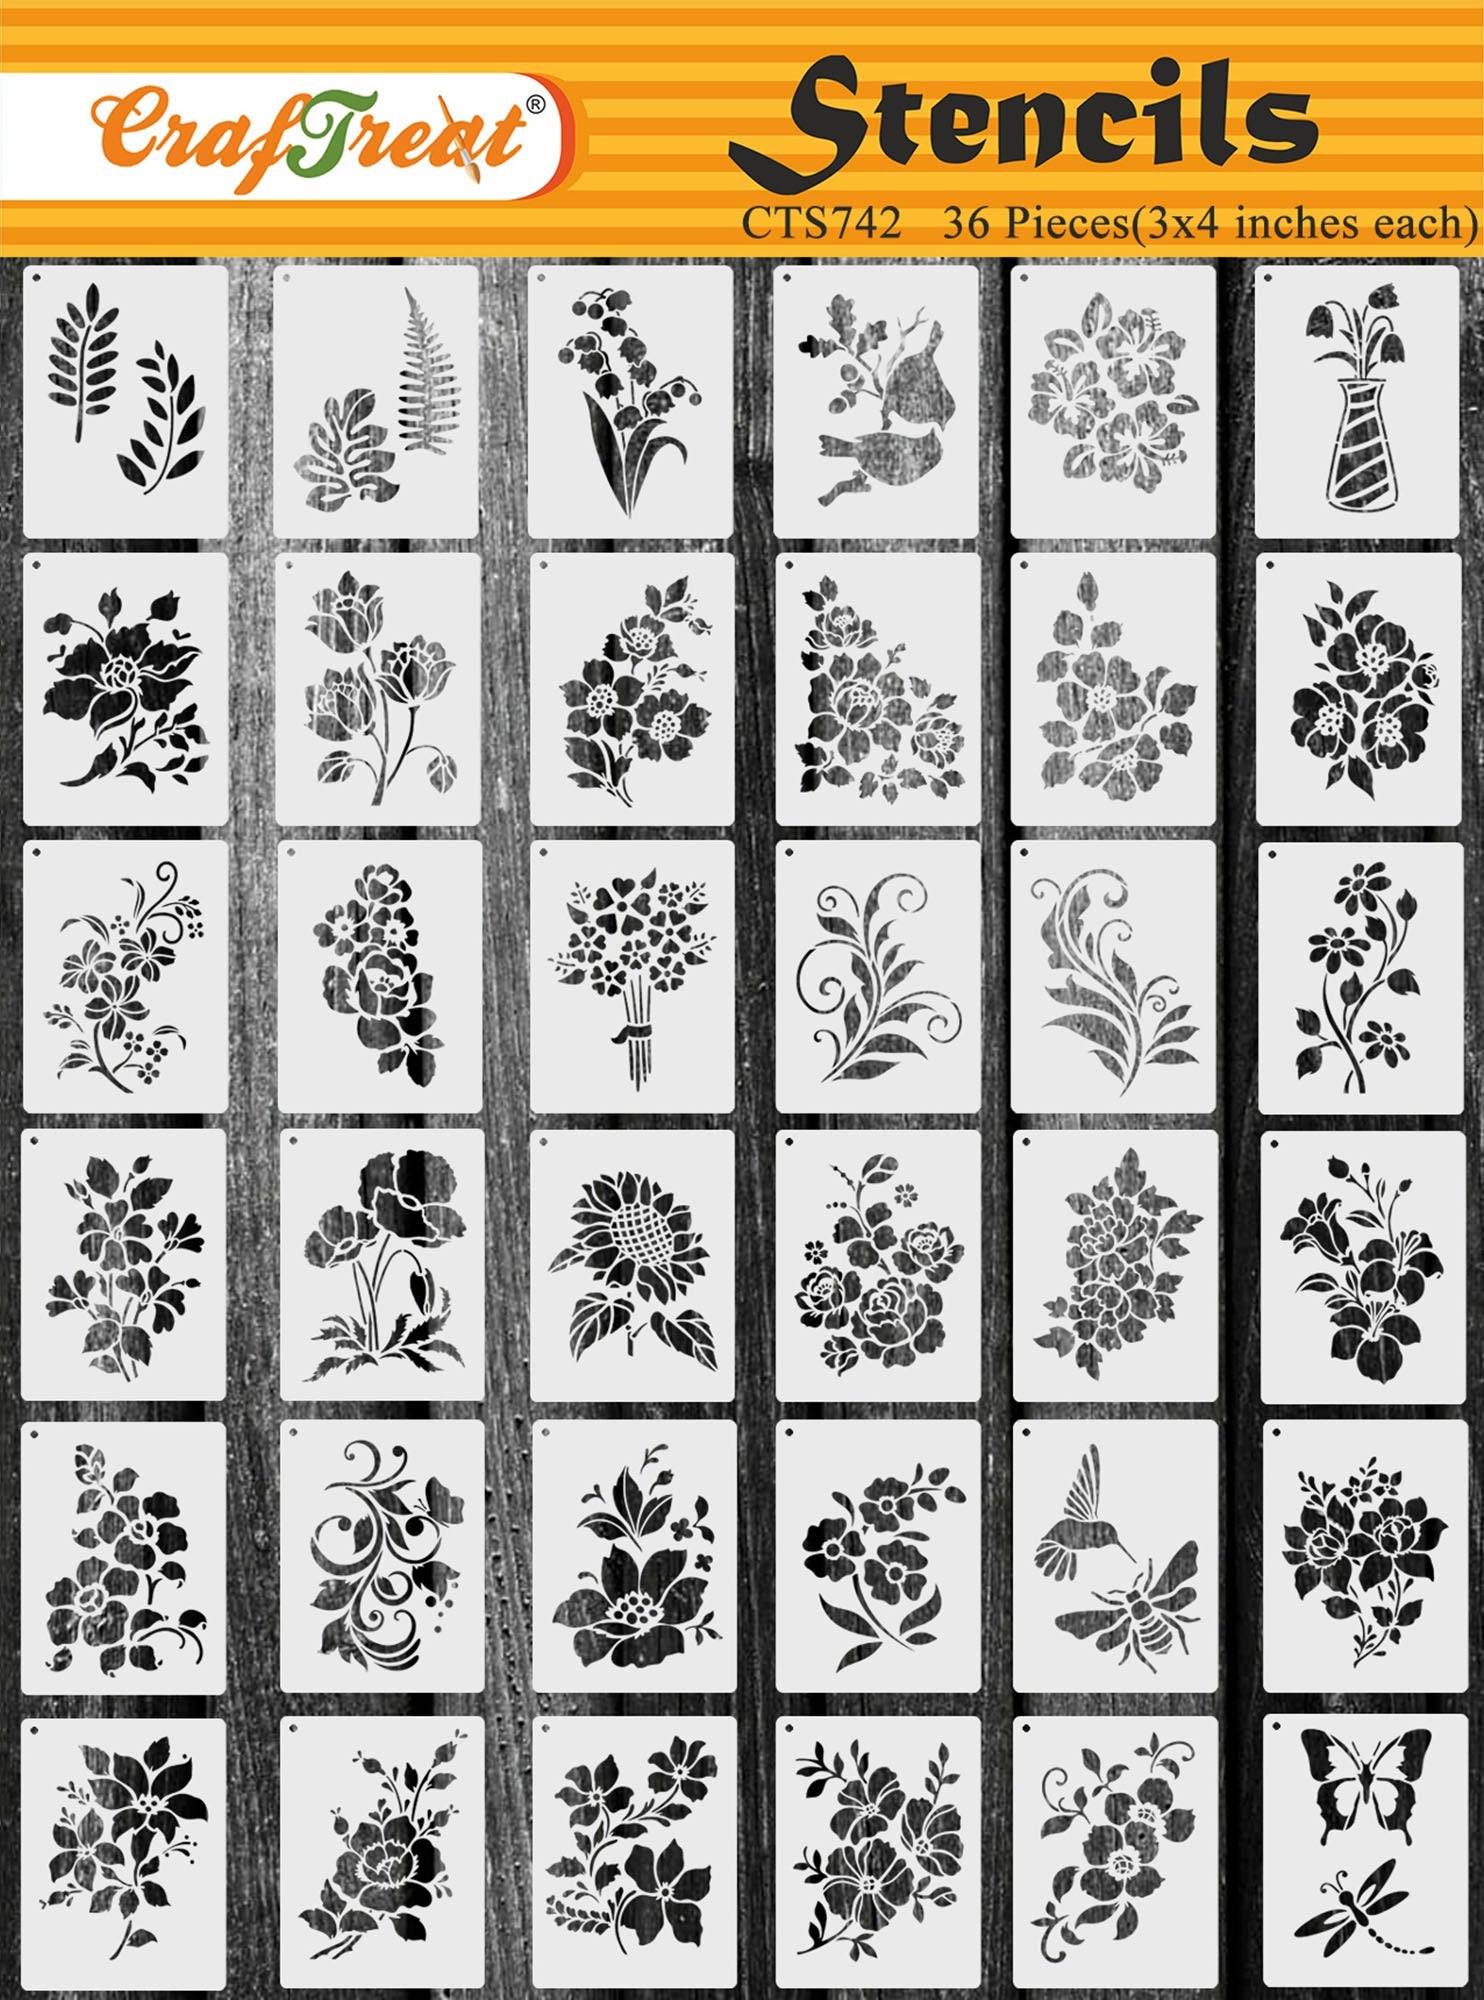 CrafTreat Flower Tile Stencil for Painting on Wood, Canvas, Paper, Fabric, Floor, Wall and Tile - Tile Flowers Small and Floral Tile - 2 Pcs - 6x6